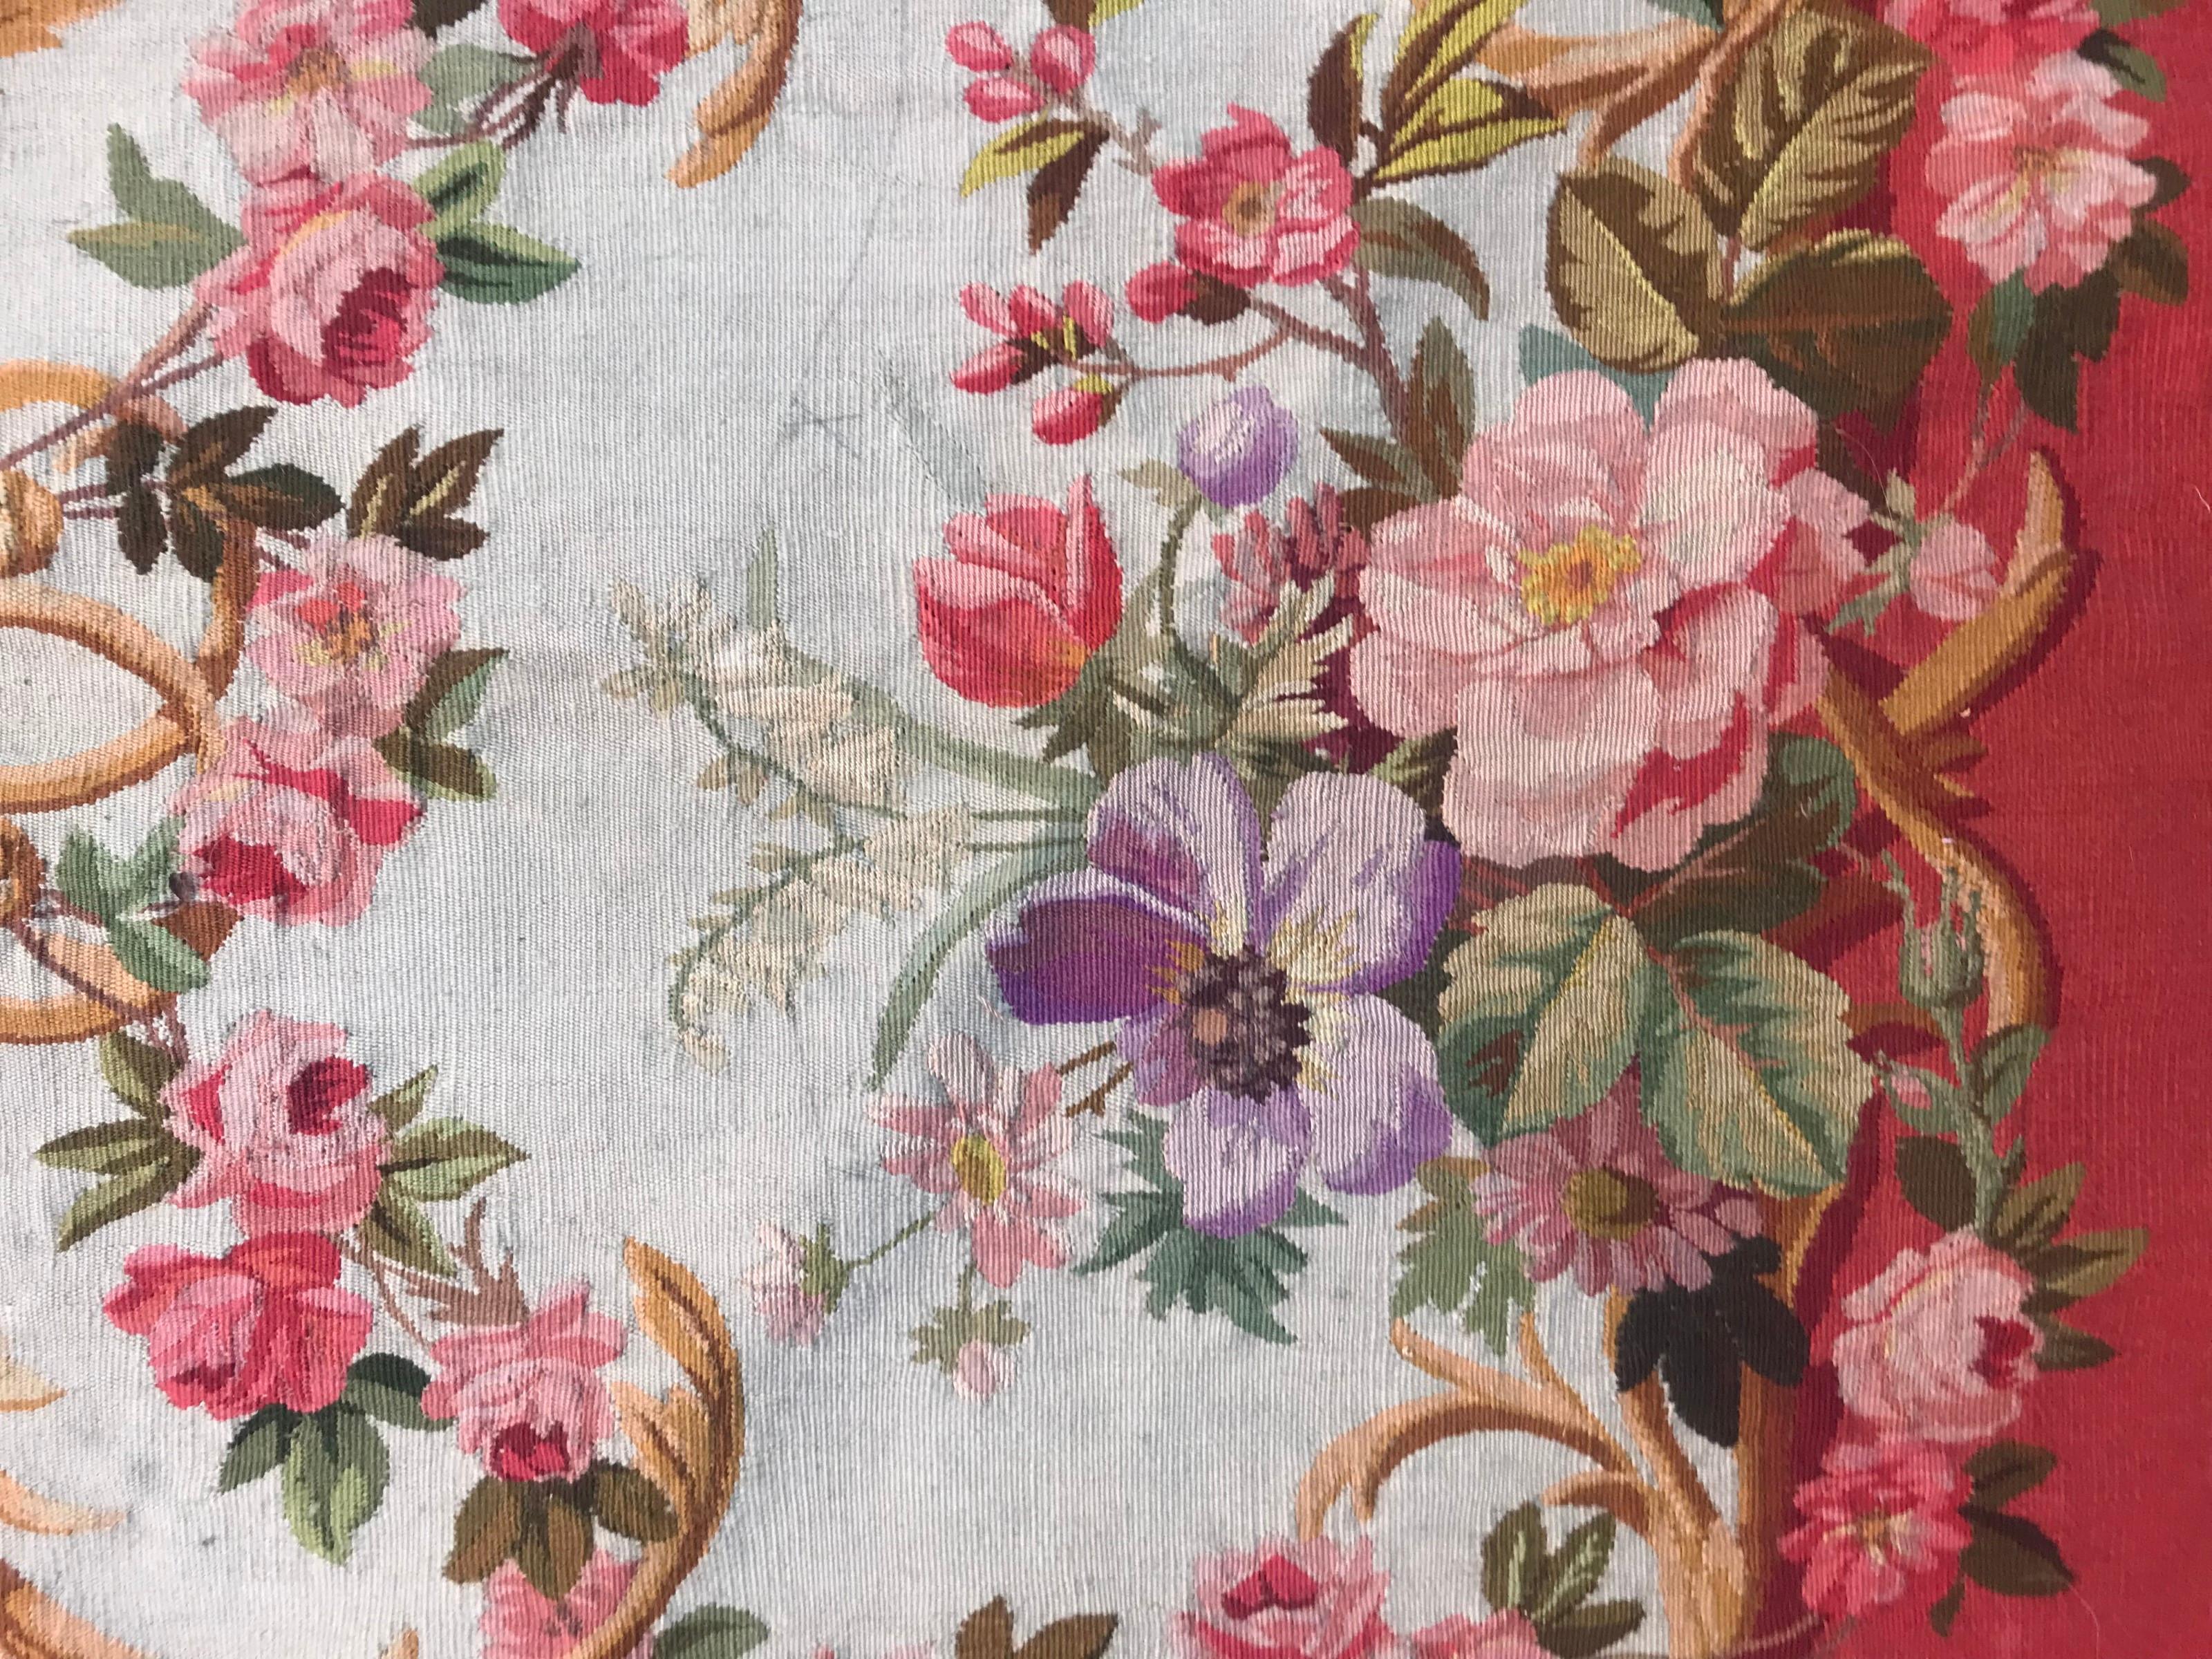 Very beautiful late 19th century Aubusson tapestry, chair element, with a beautiful design and colors, wool and silk woven on cotton foundation.